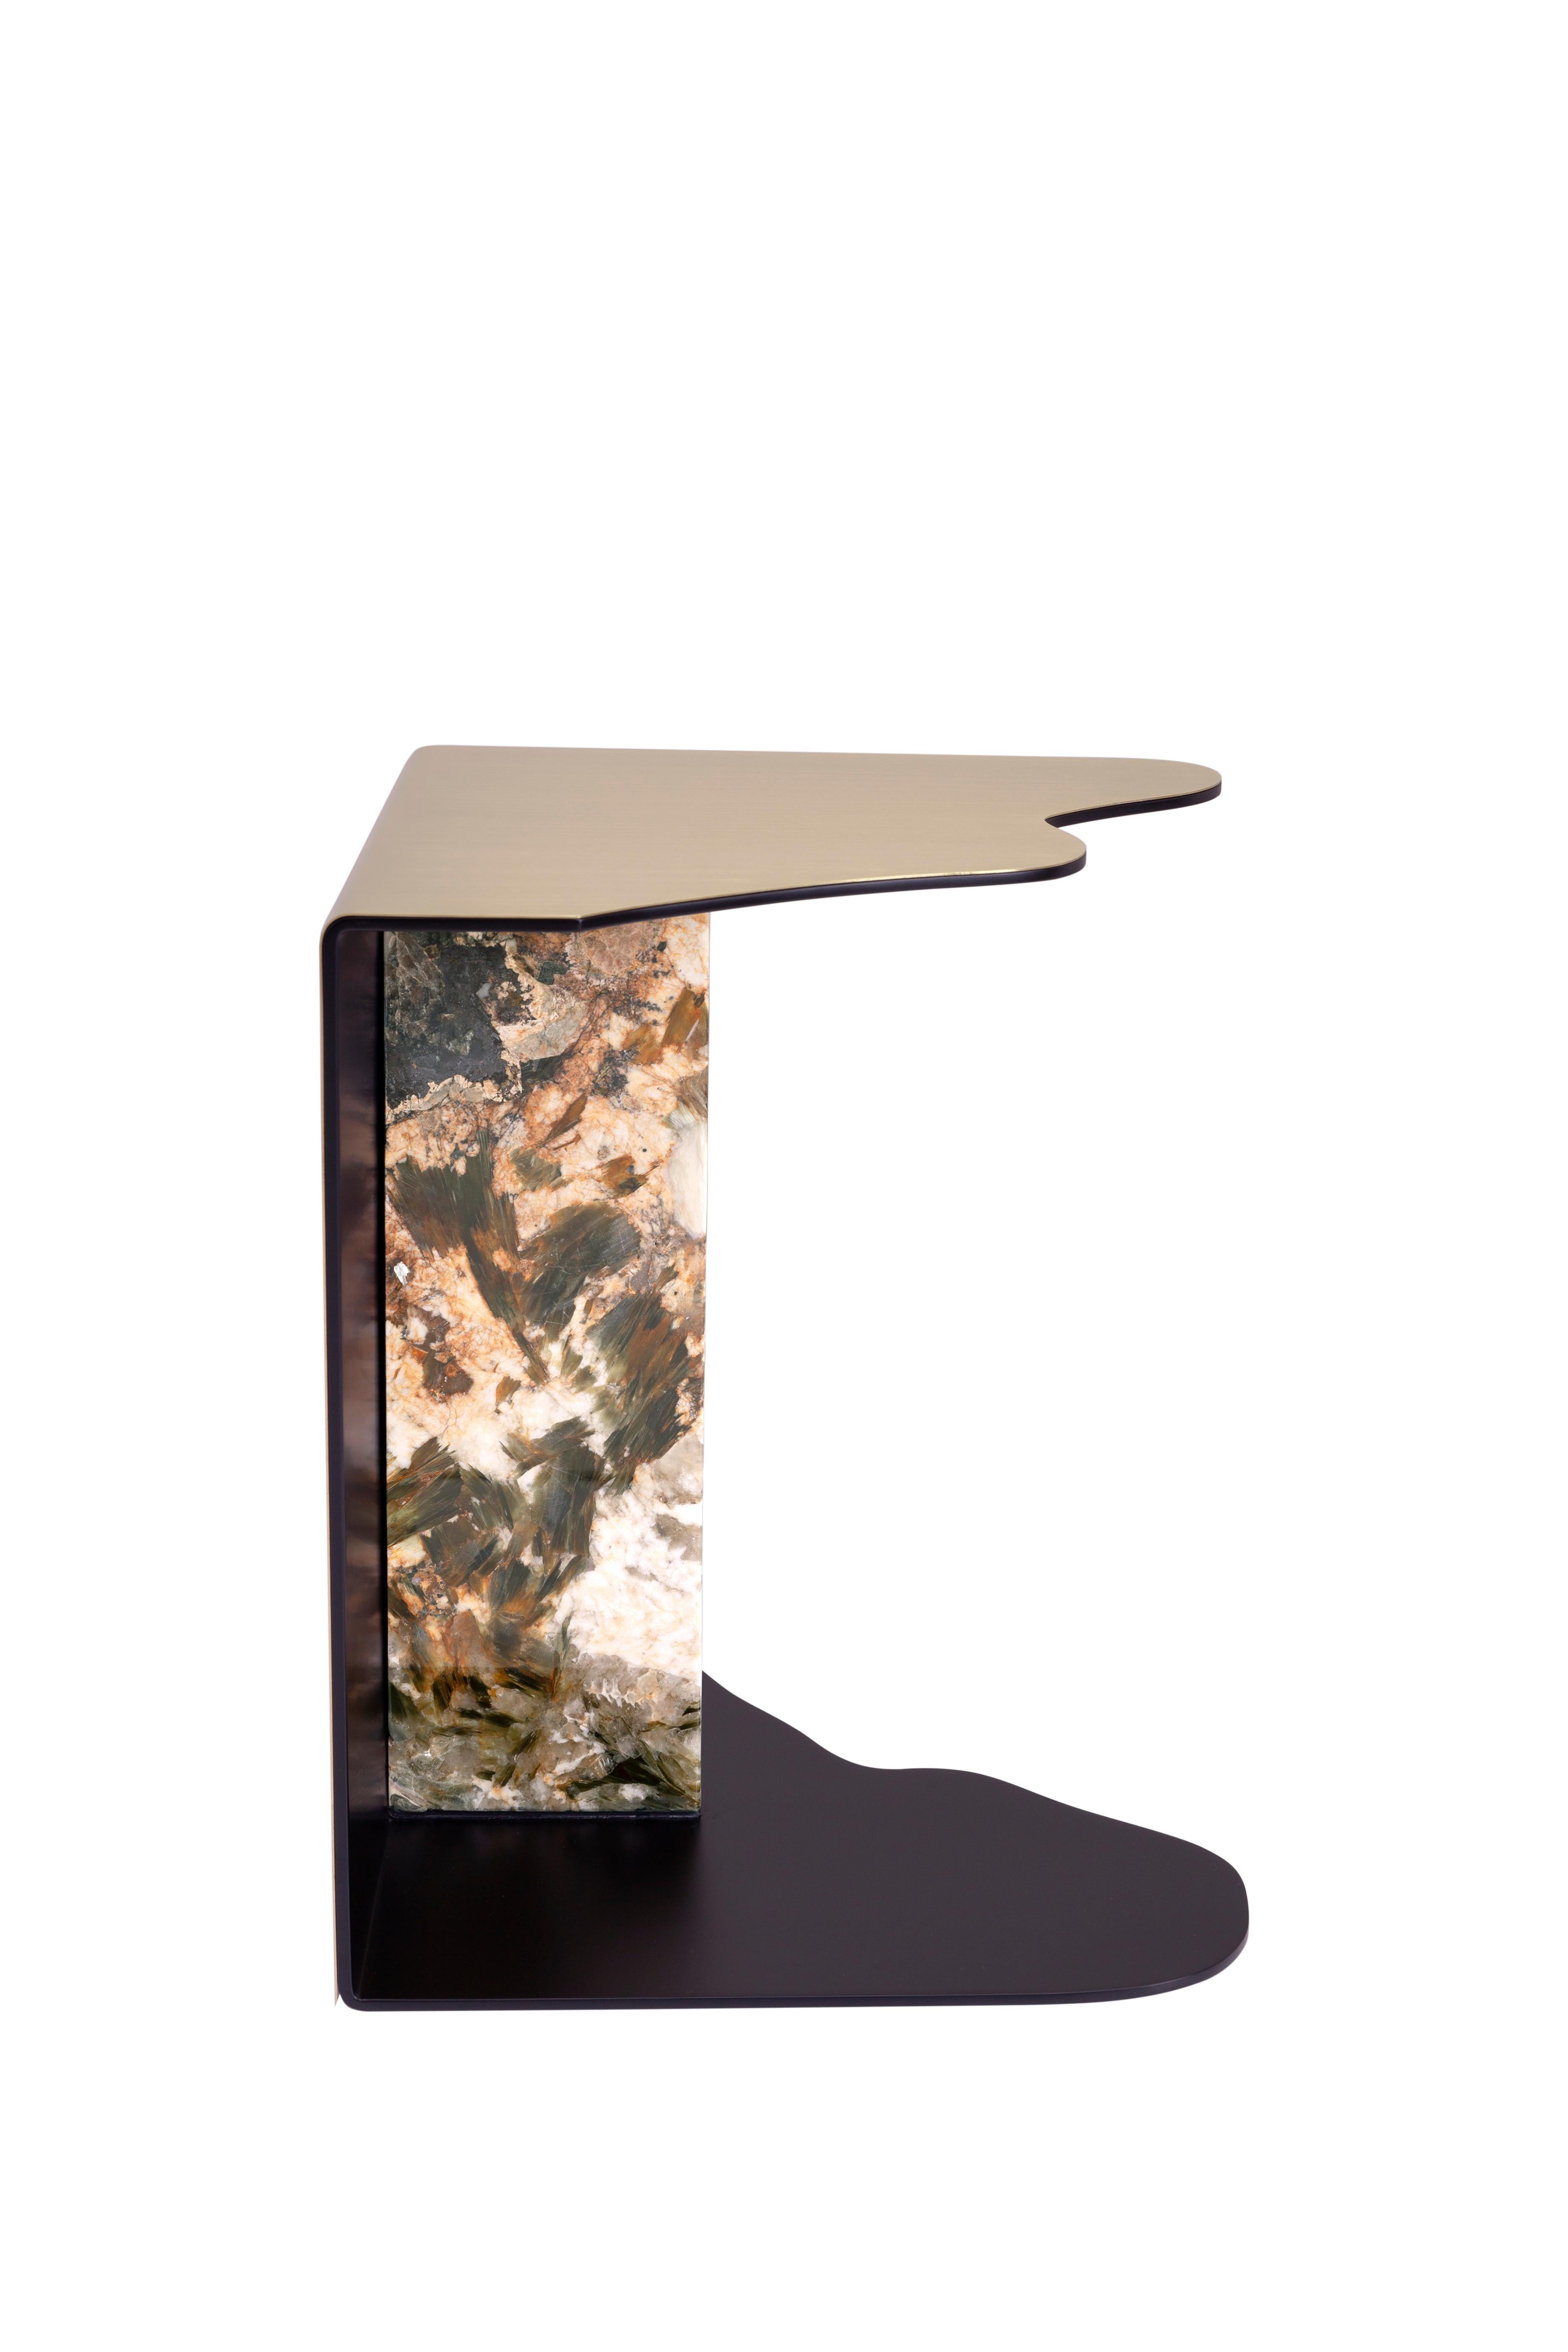 Brushed Organic Modern Raw Side Table Patagonia Granite Handmade Portugal by Greenapple For Sale